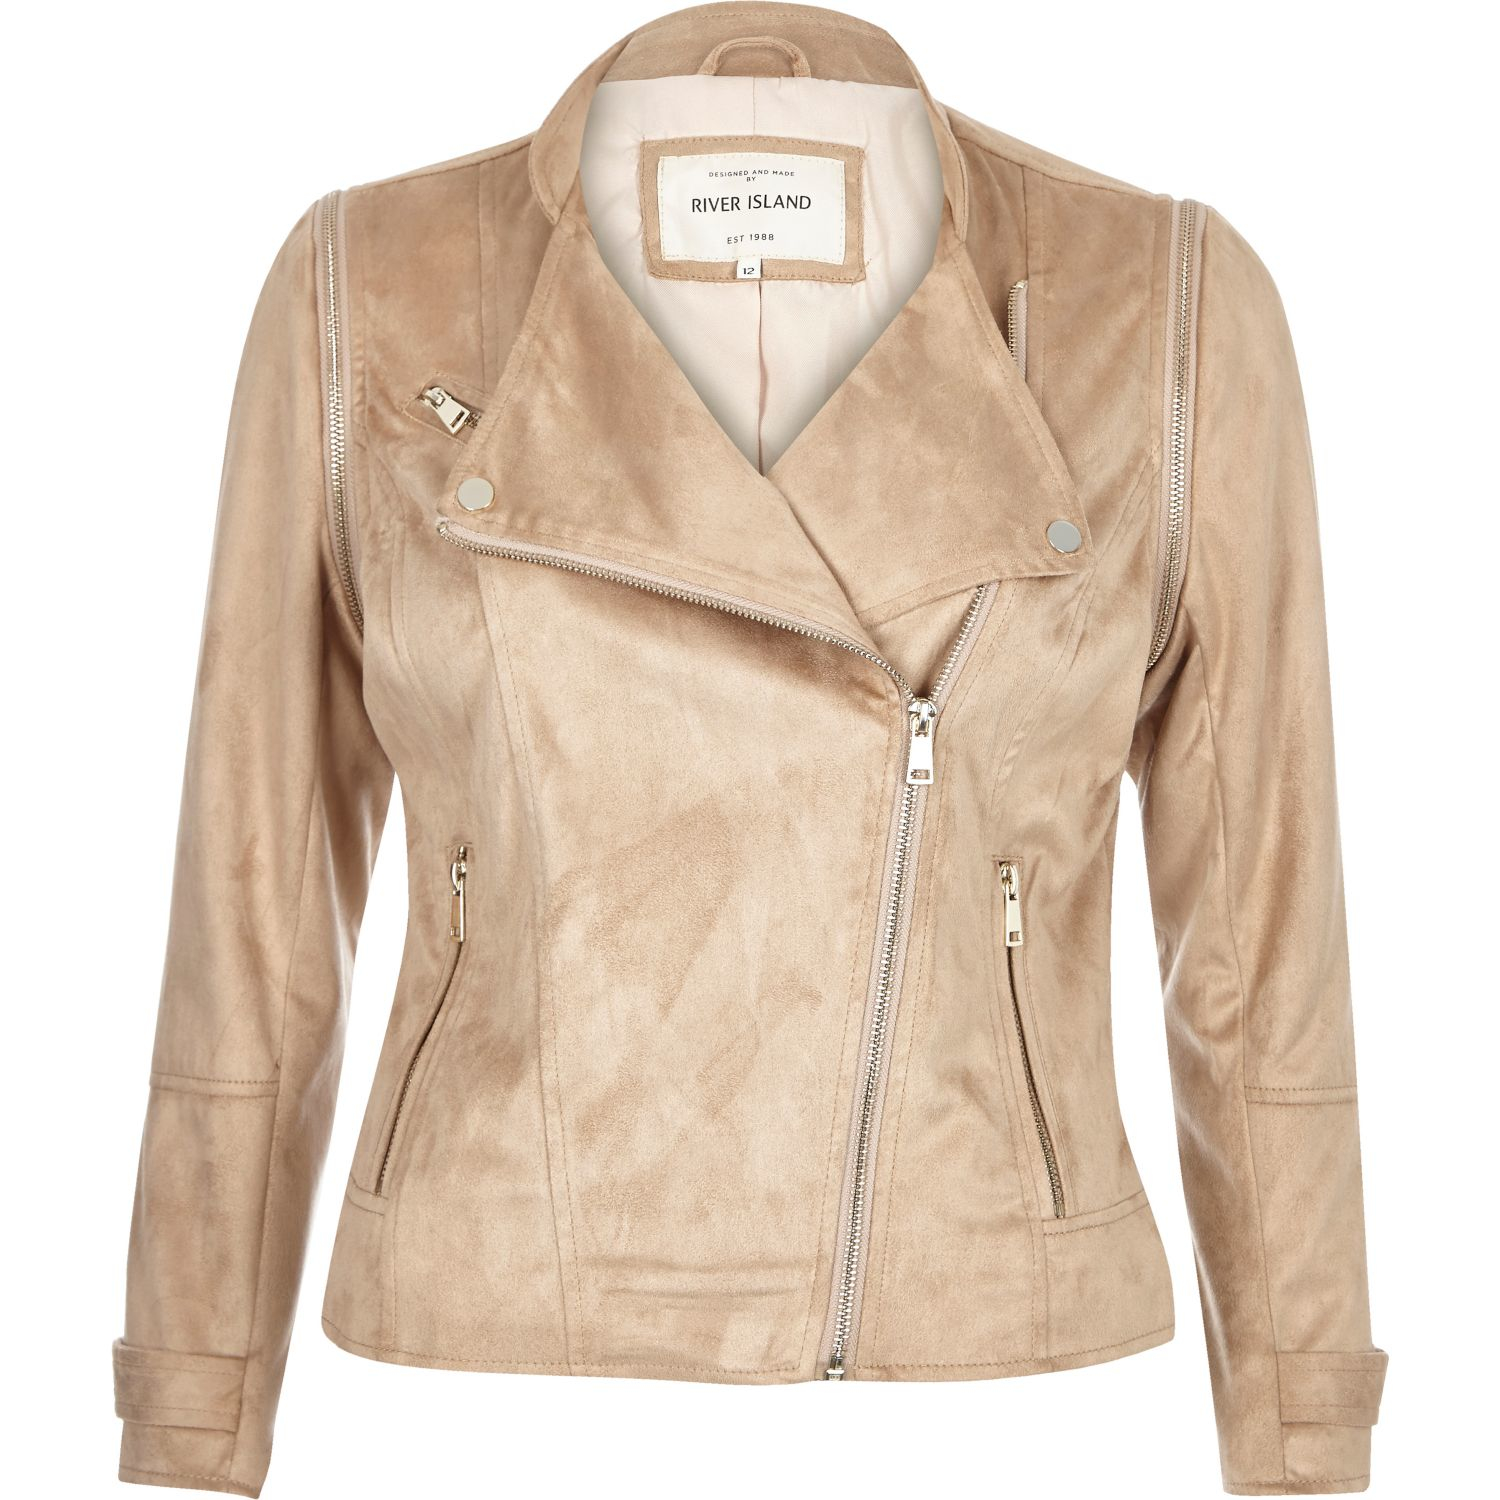 Lyst - River Island Nude Faux Suede Biker Jacket in Natural